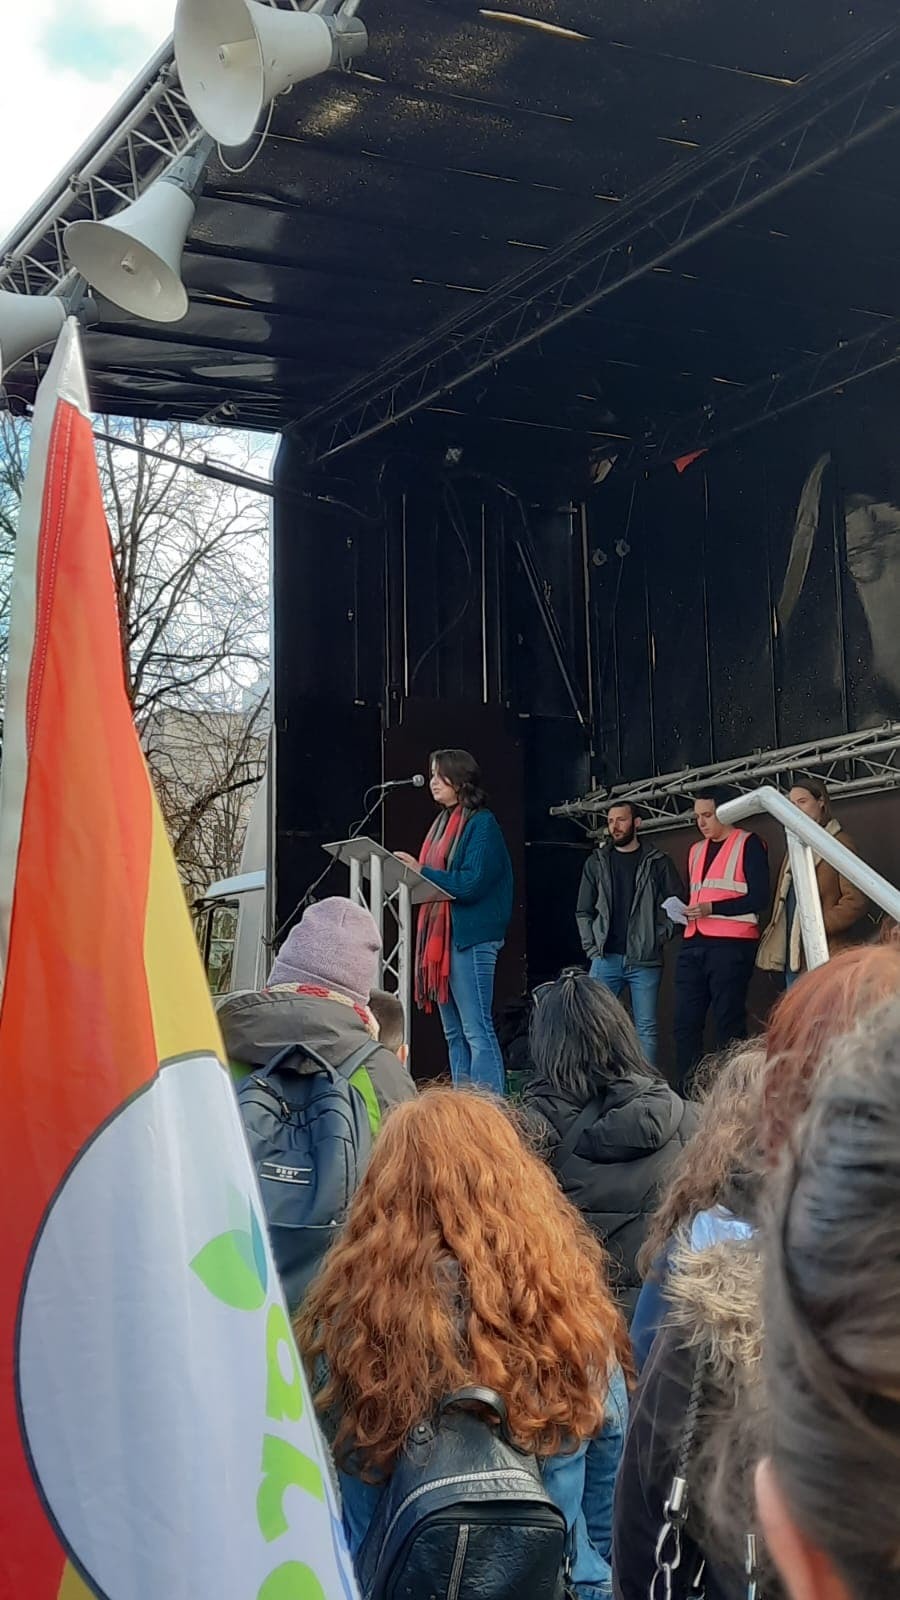 Eibhlinn Fee speaking at the Climate Coalition Northern Ireland rally in Belfast.